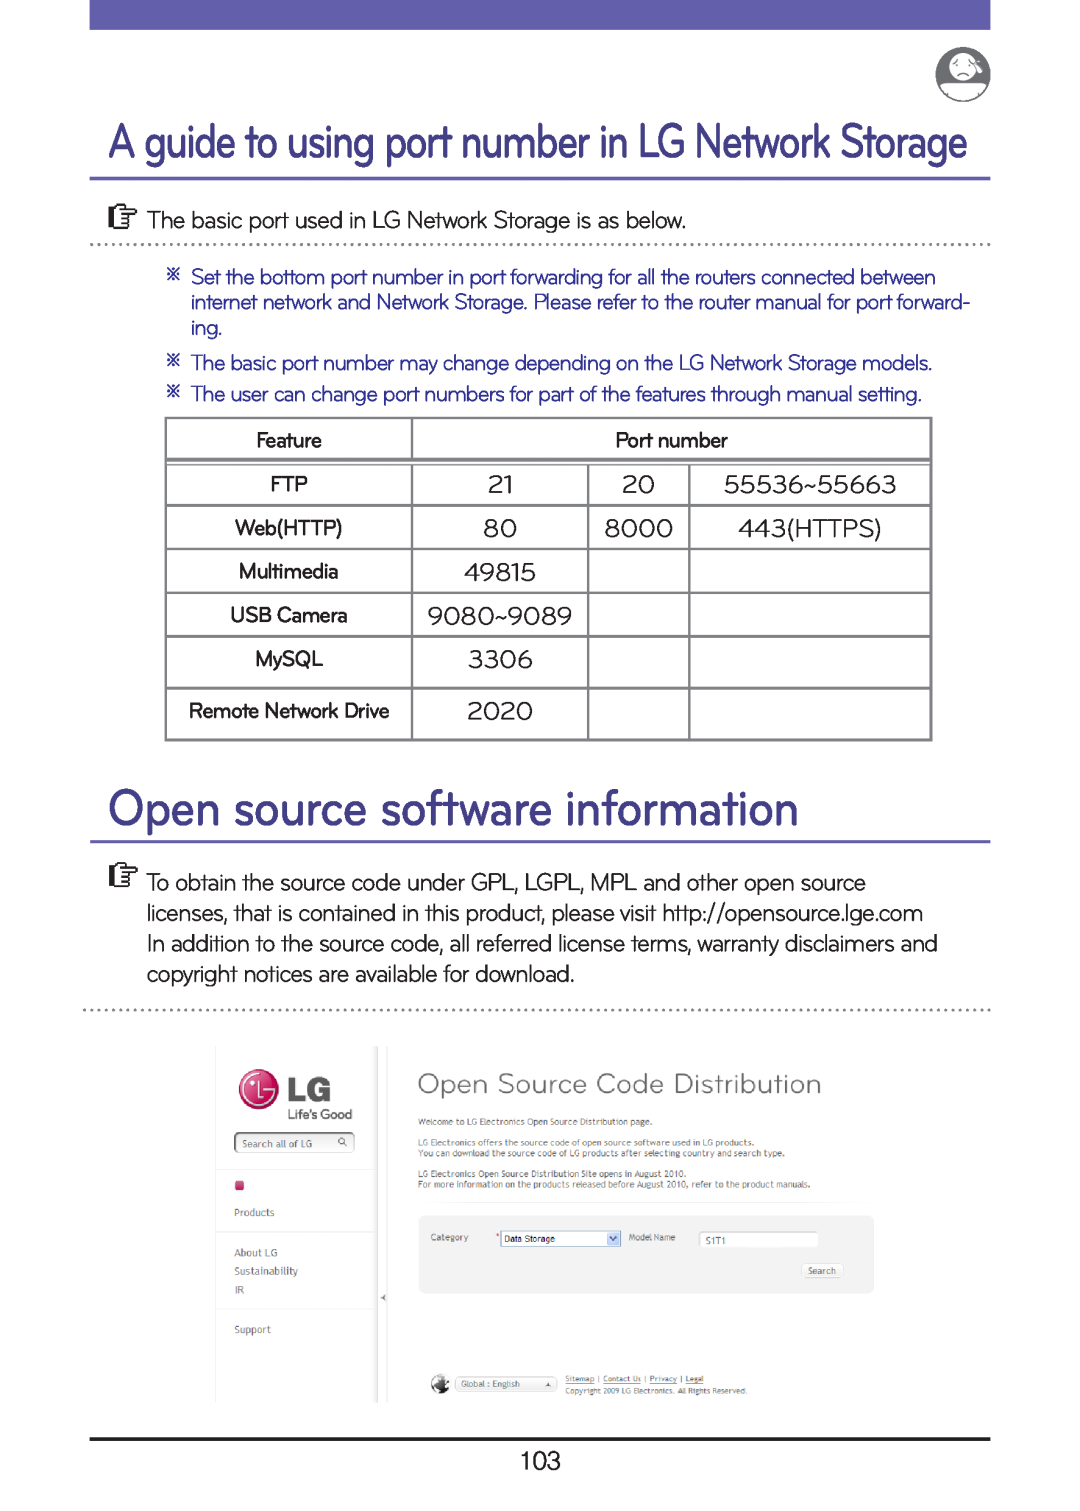 LG Electronics N1A1 Open source software information, The basic port used in LG Network Storage is as below, 443HTTPS 